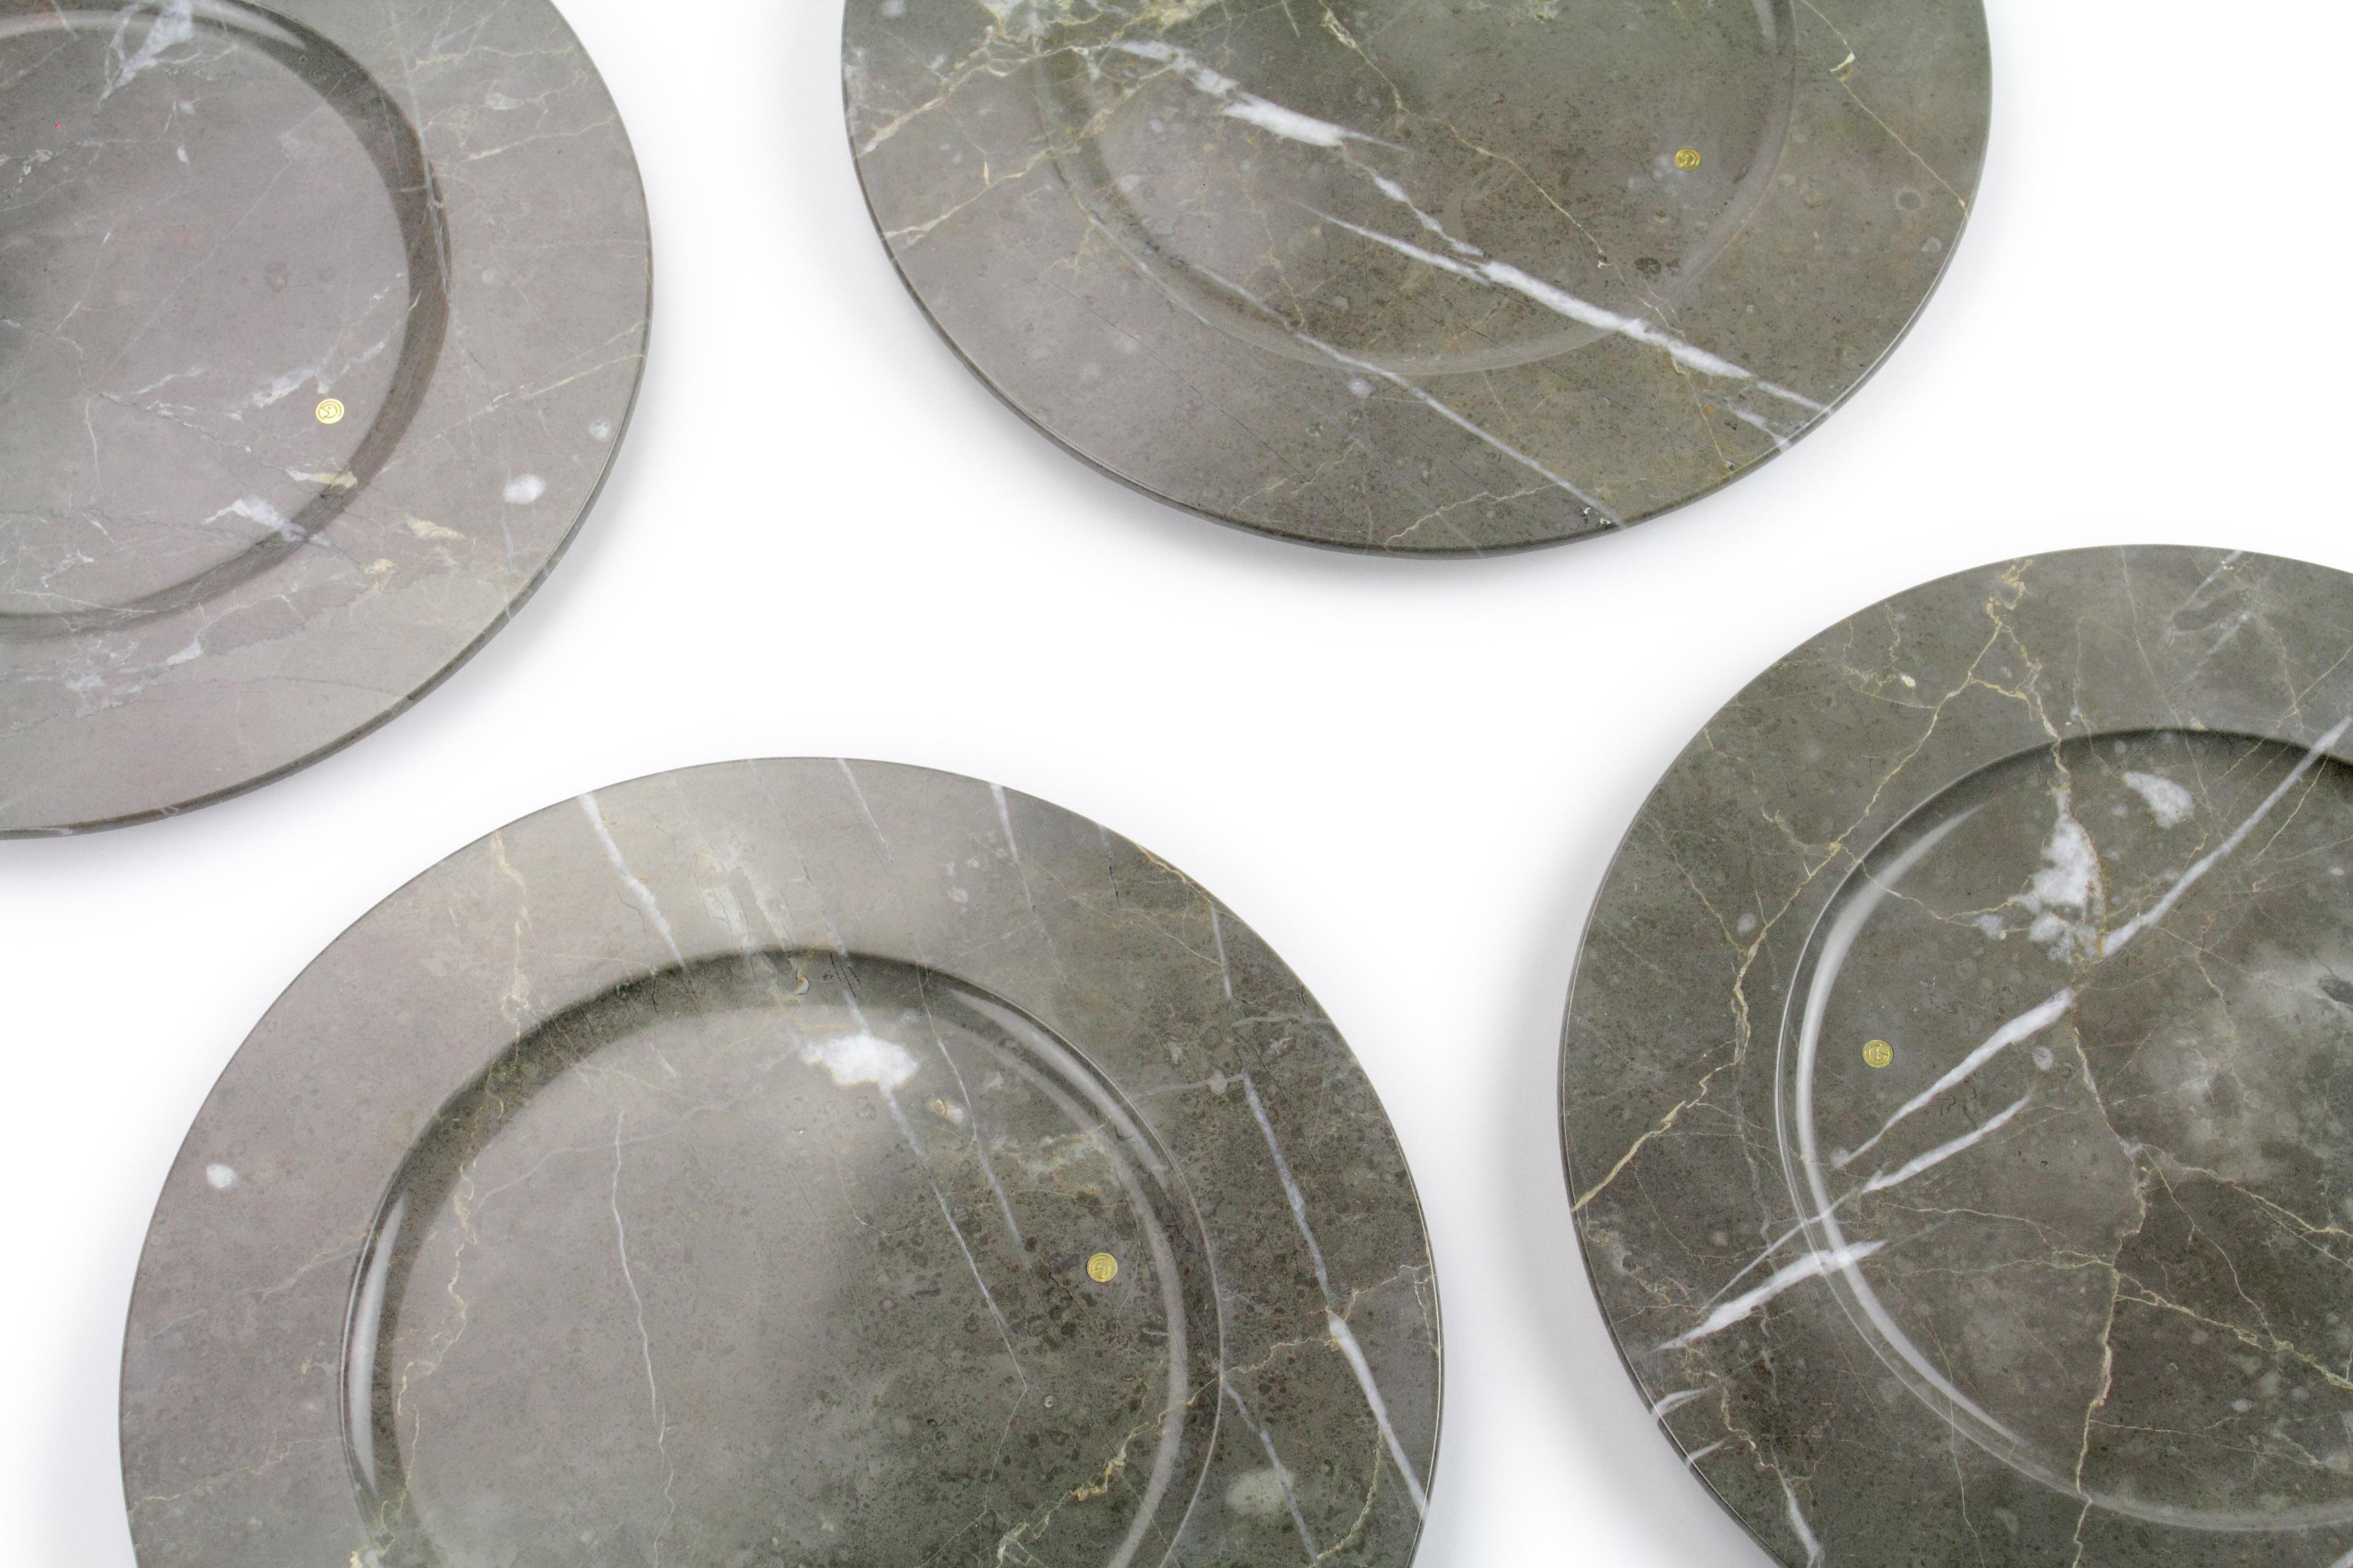 Italian Charger Plate Platters Serveware Set of 4 Imperial Grey Marble Handmade Italy For Sale